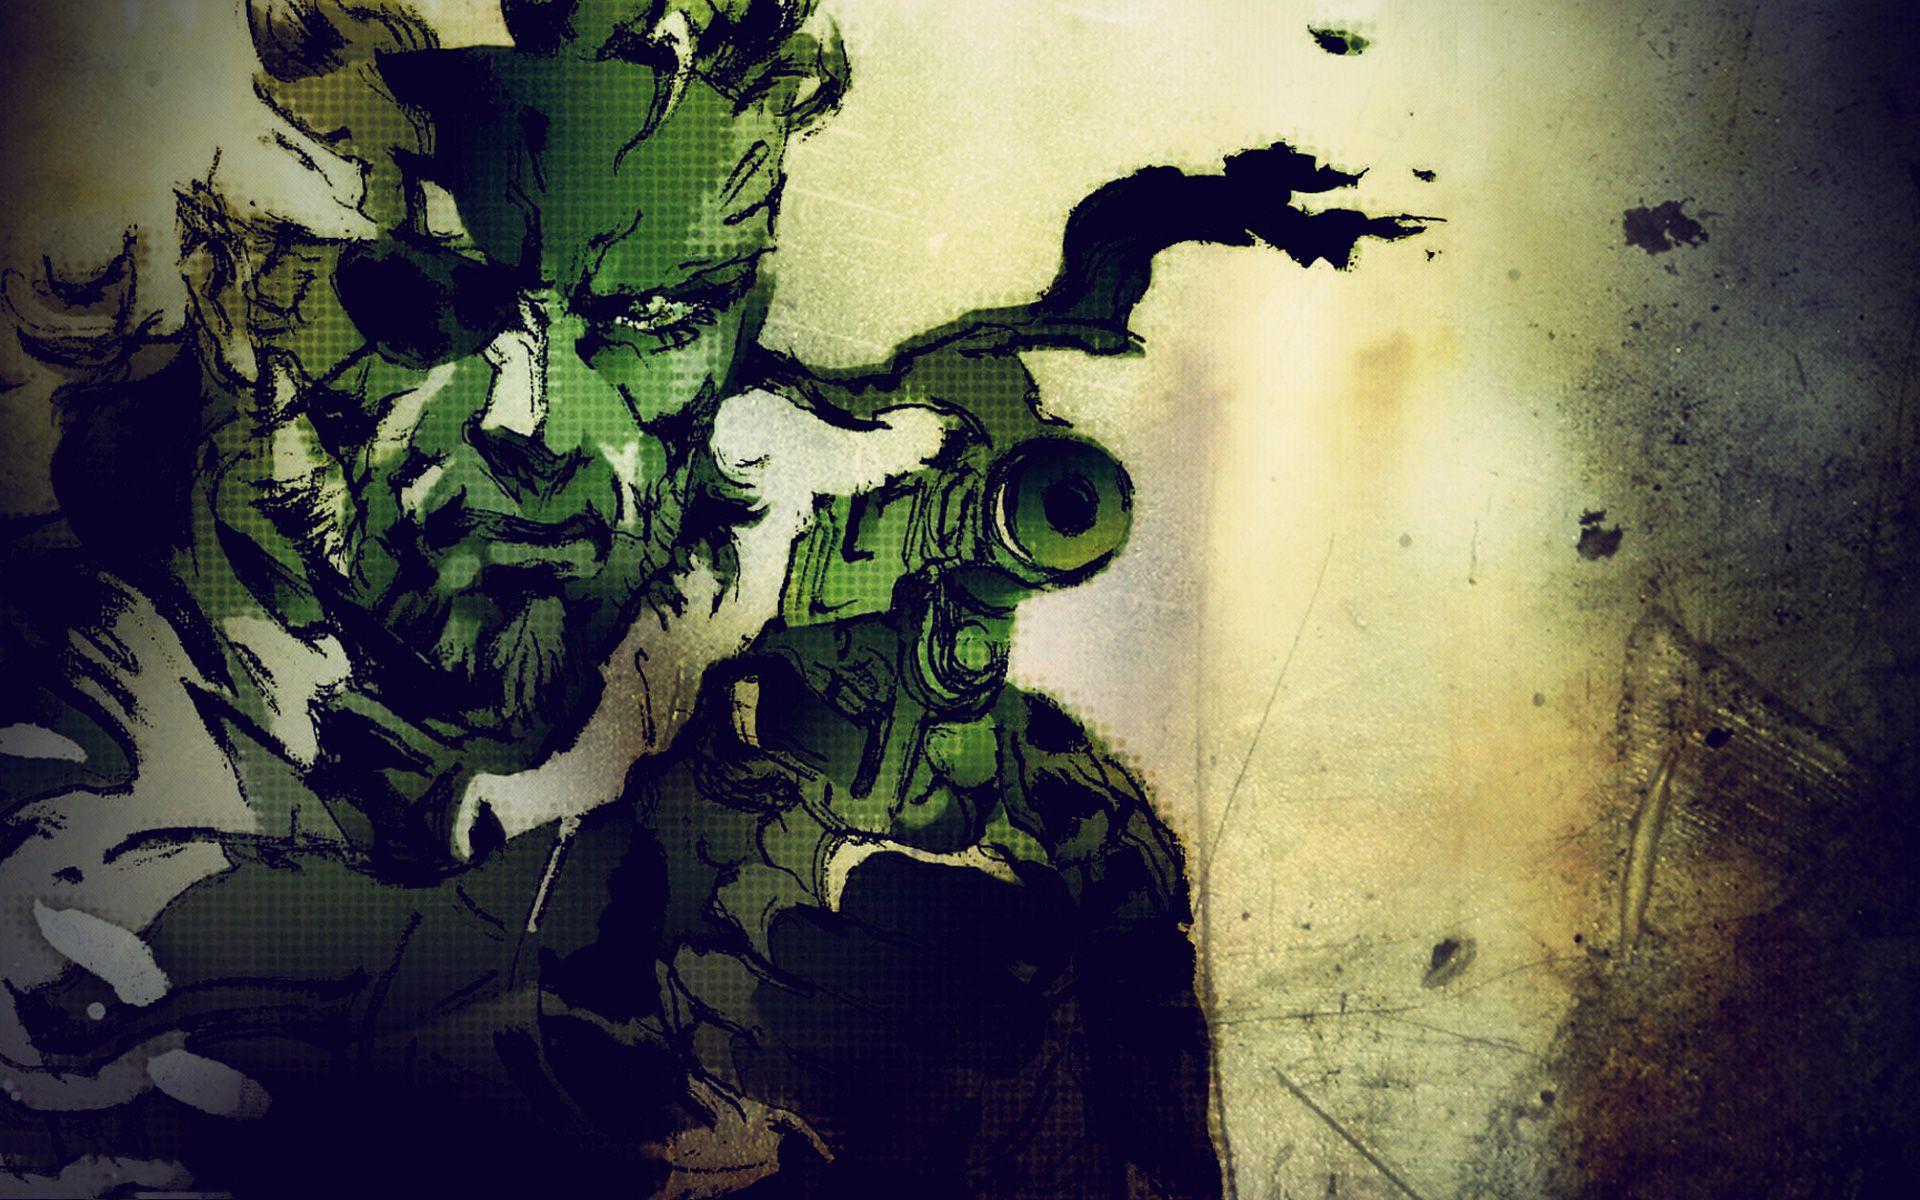 Metal Gear Solid 1920x1200 HD Wallpaper and FREE